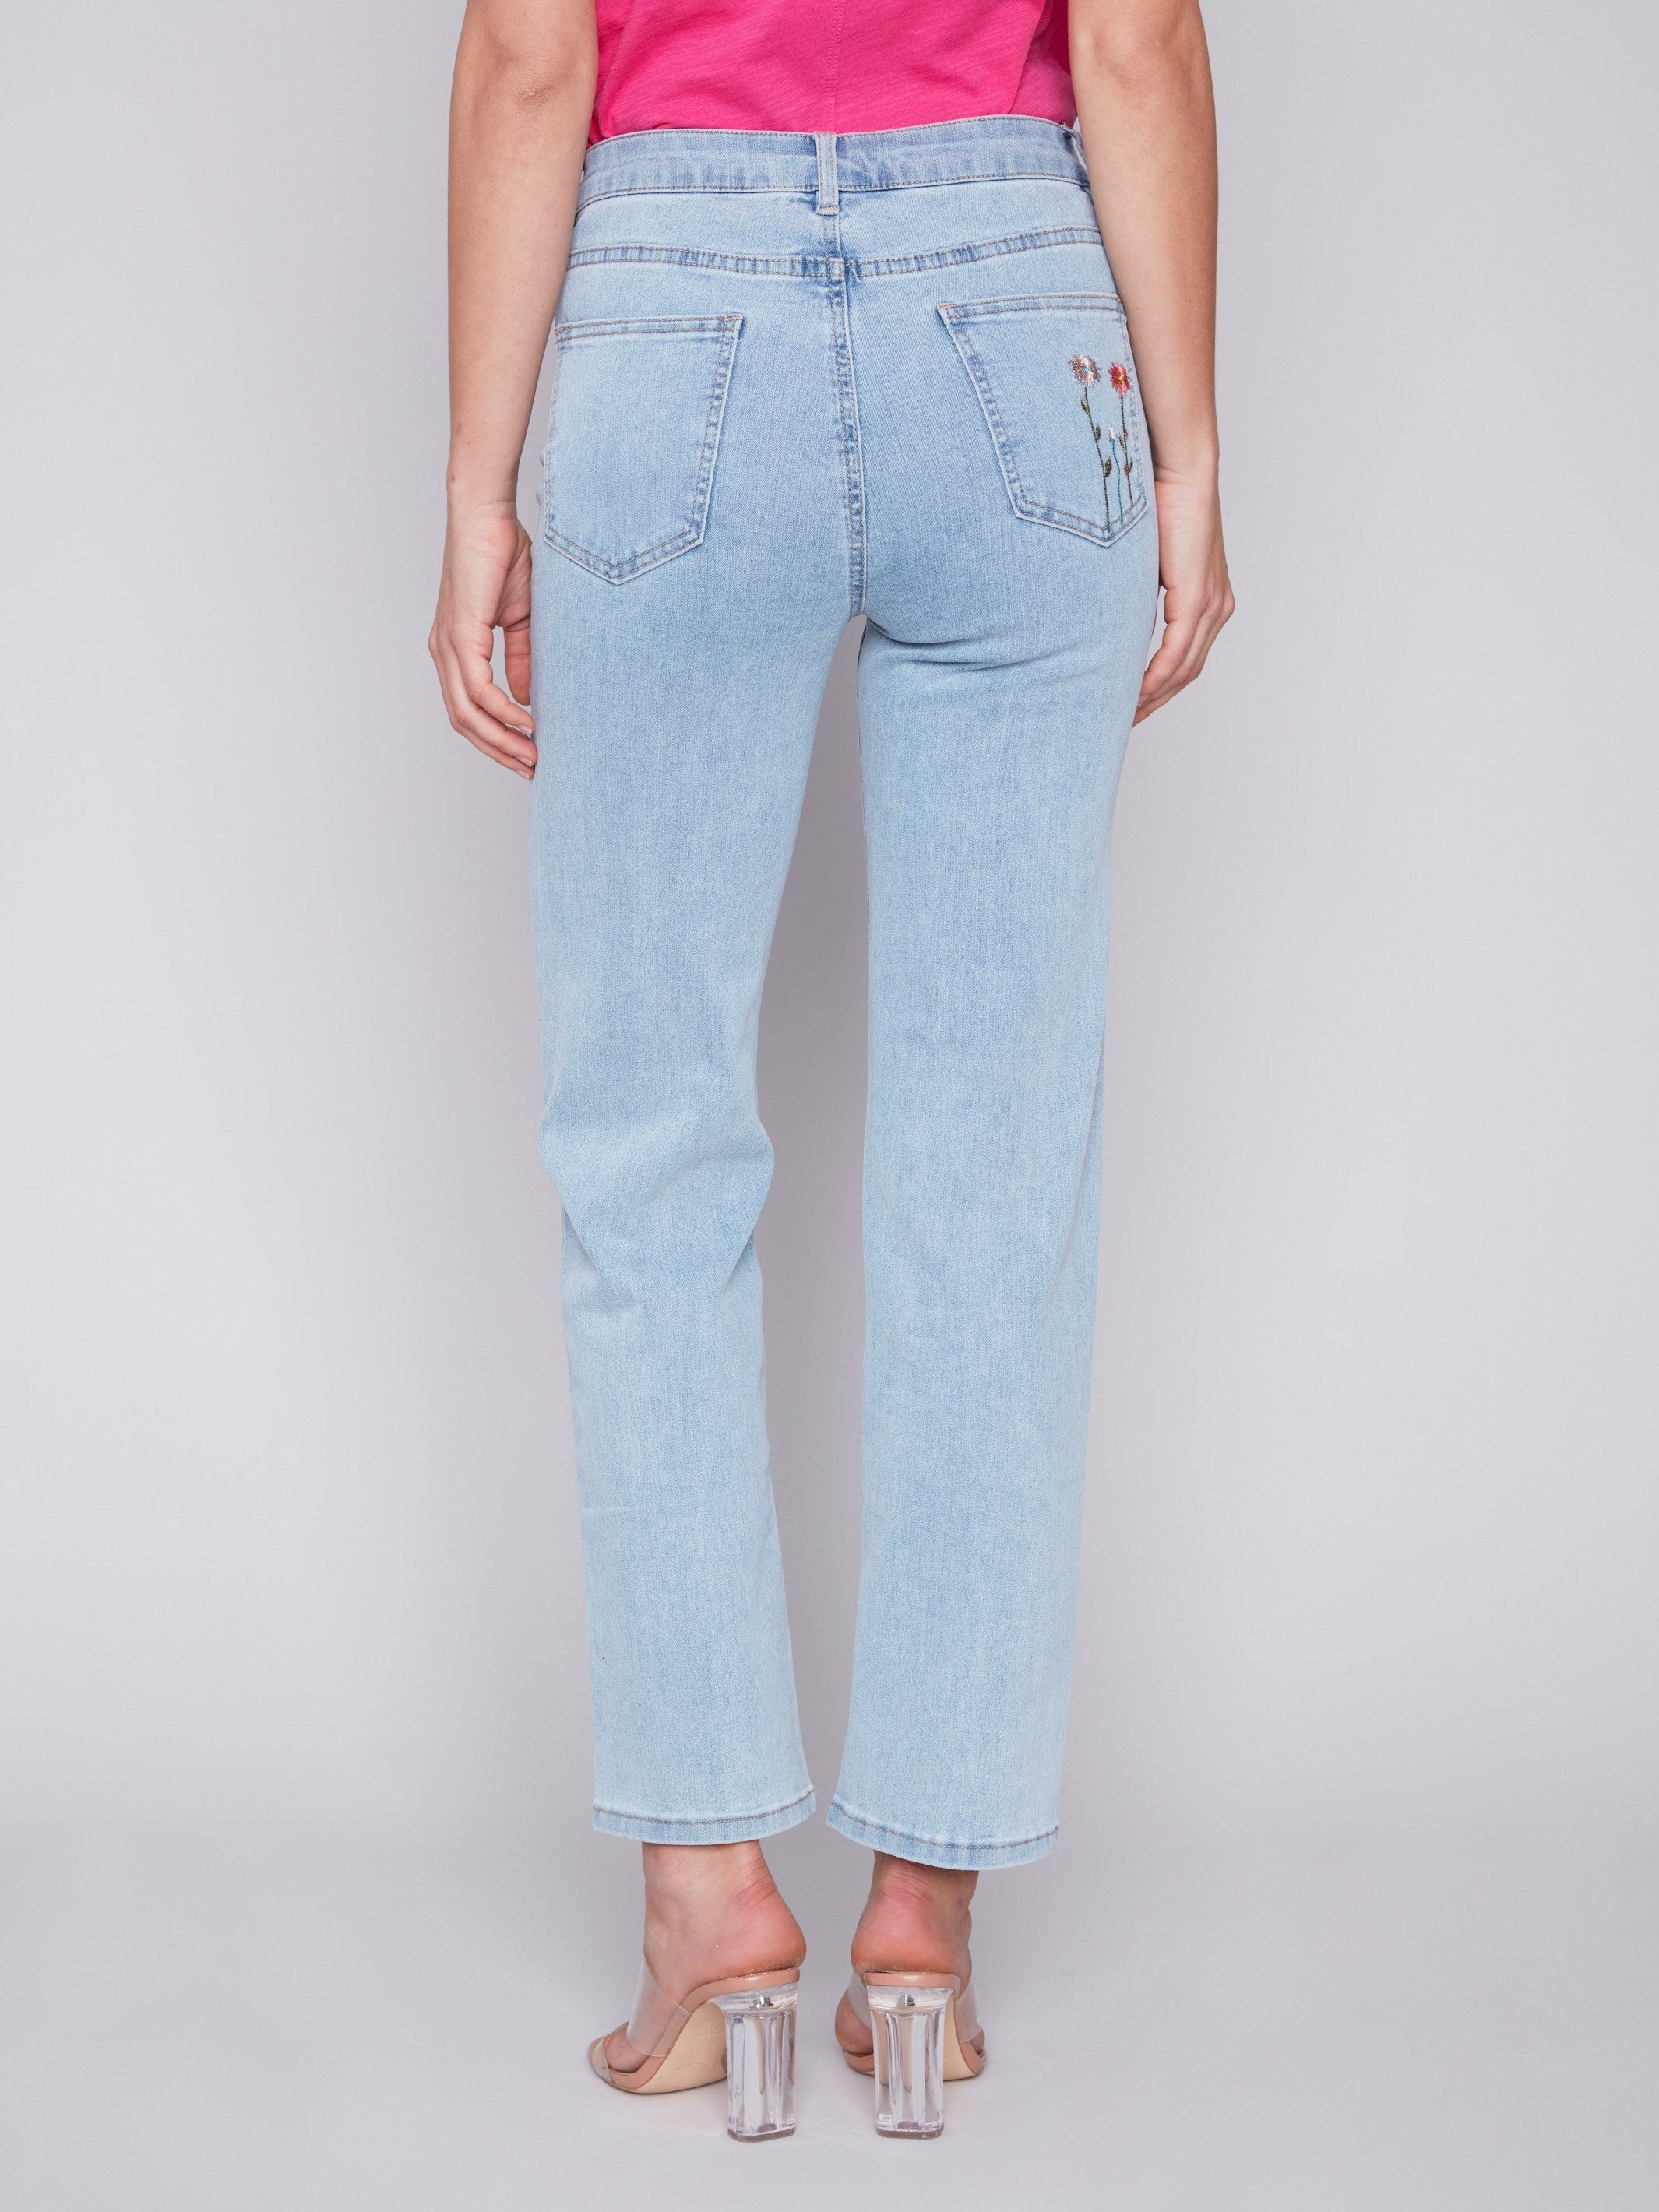 Floral Embroidered Jeans - Bleach Blue - Charlie B Collection Canada - Image 3